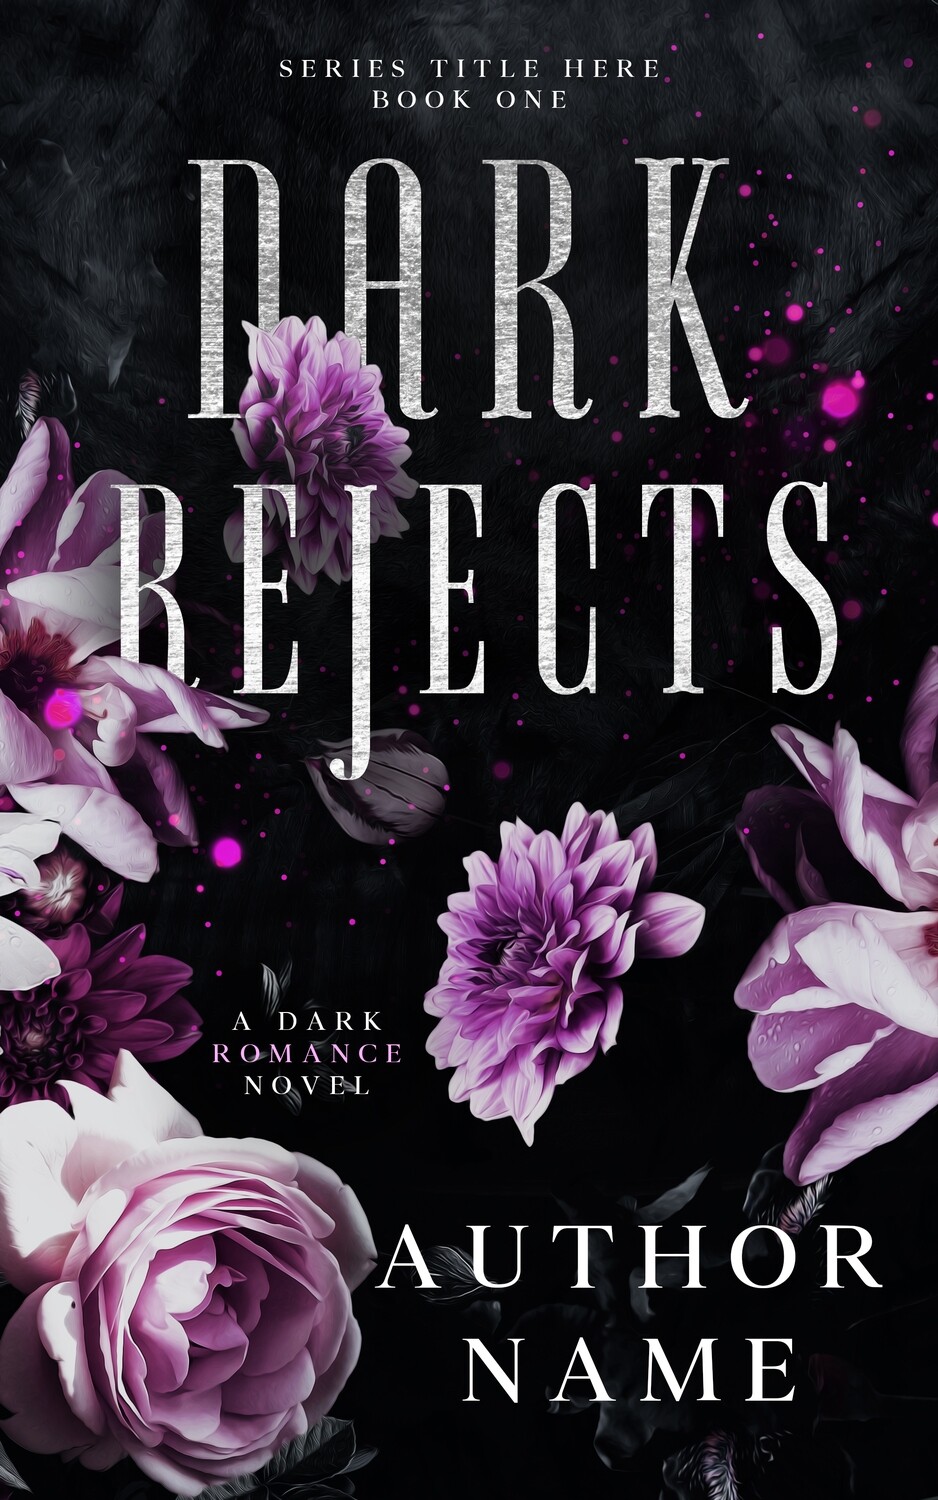 DARK REJECTS